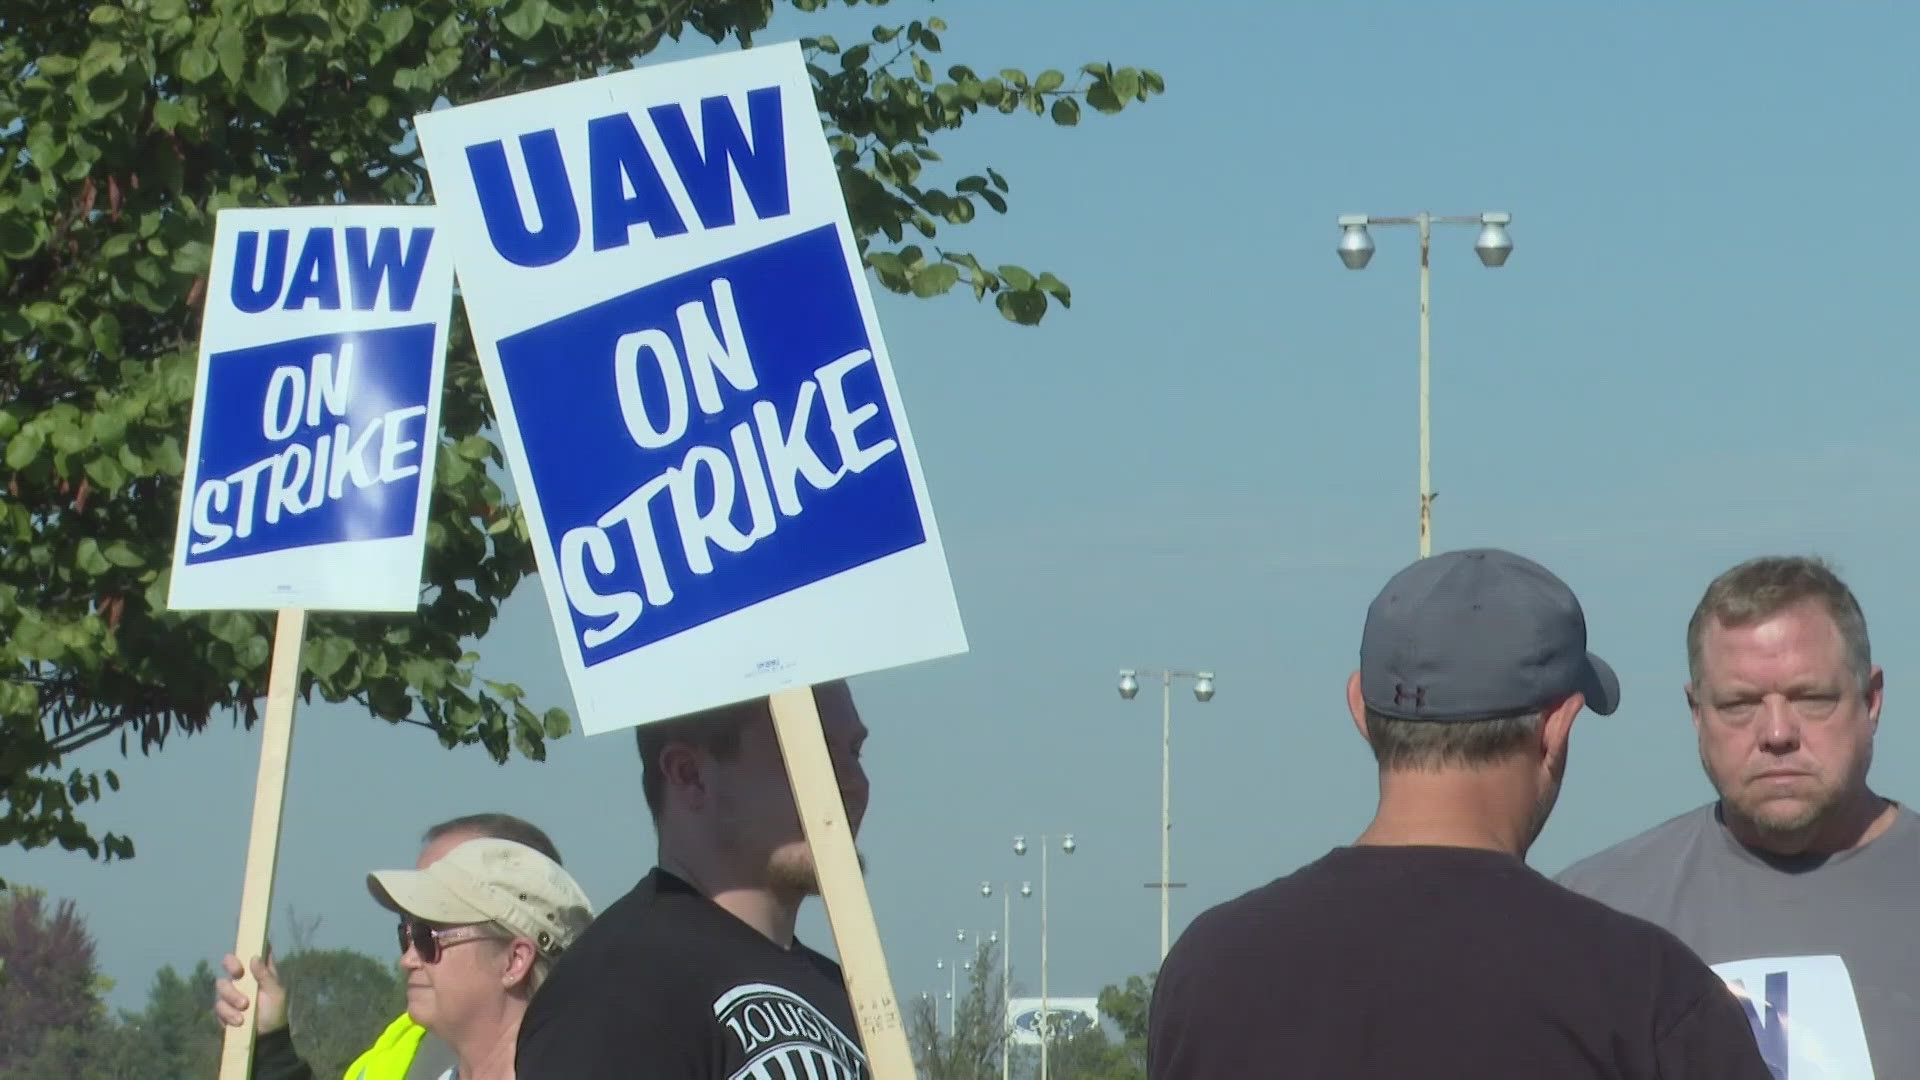 UAW Local 862 President Todd Dunn speculated more than 3,000 workers at Ford's Louisville Assembly Plant (LAP) could face layoffs as early as Friday.